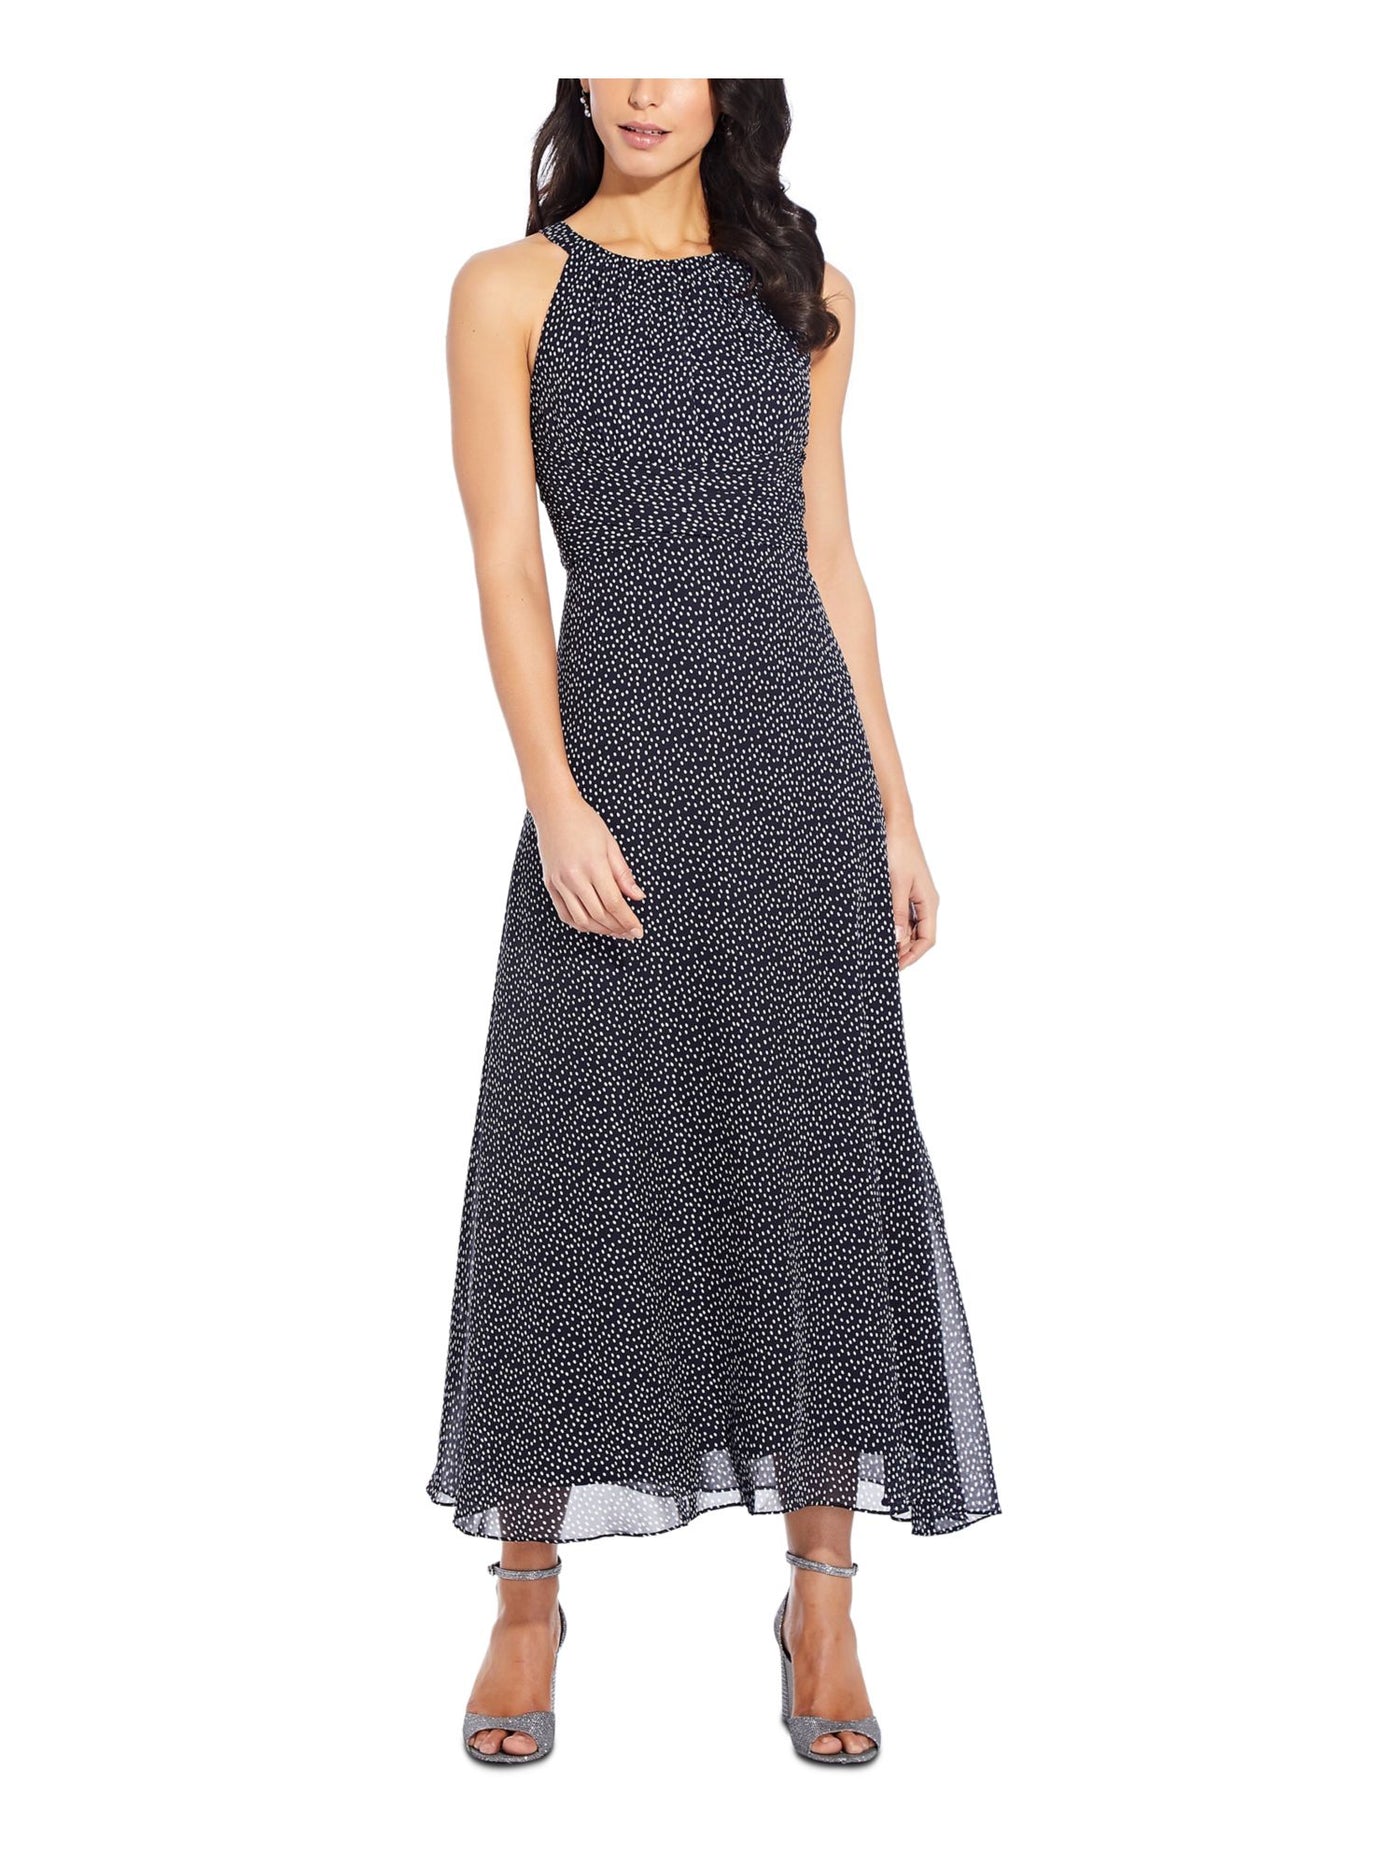 ADRIANNA PAPELL Womens Navy Belted Pleated Lined Polka Dot Sleeveless Halter Midi Evening Fit + Flare Dress Petites 16P